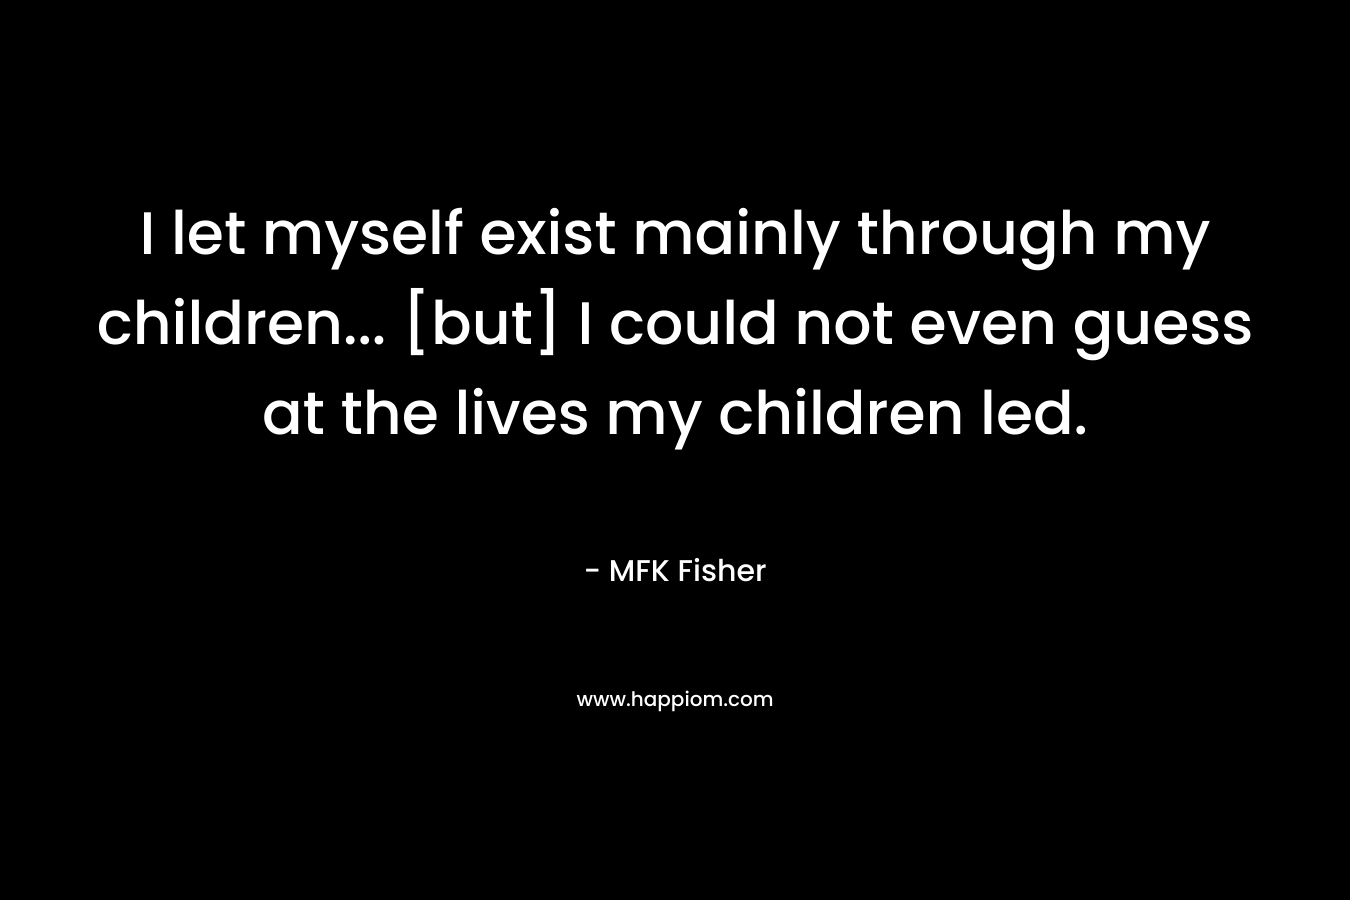 I let myself exist mainly through my children... [but] I could not even guess at the lives my children led.